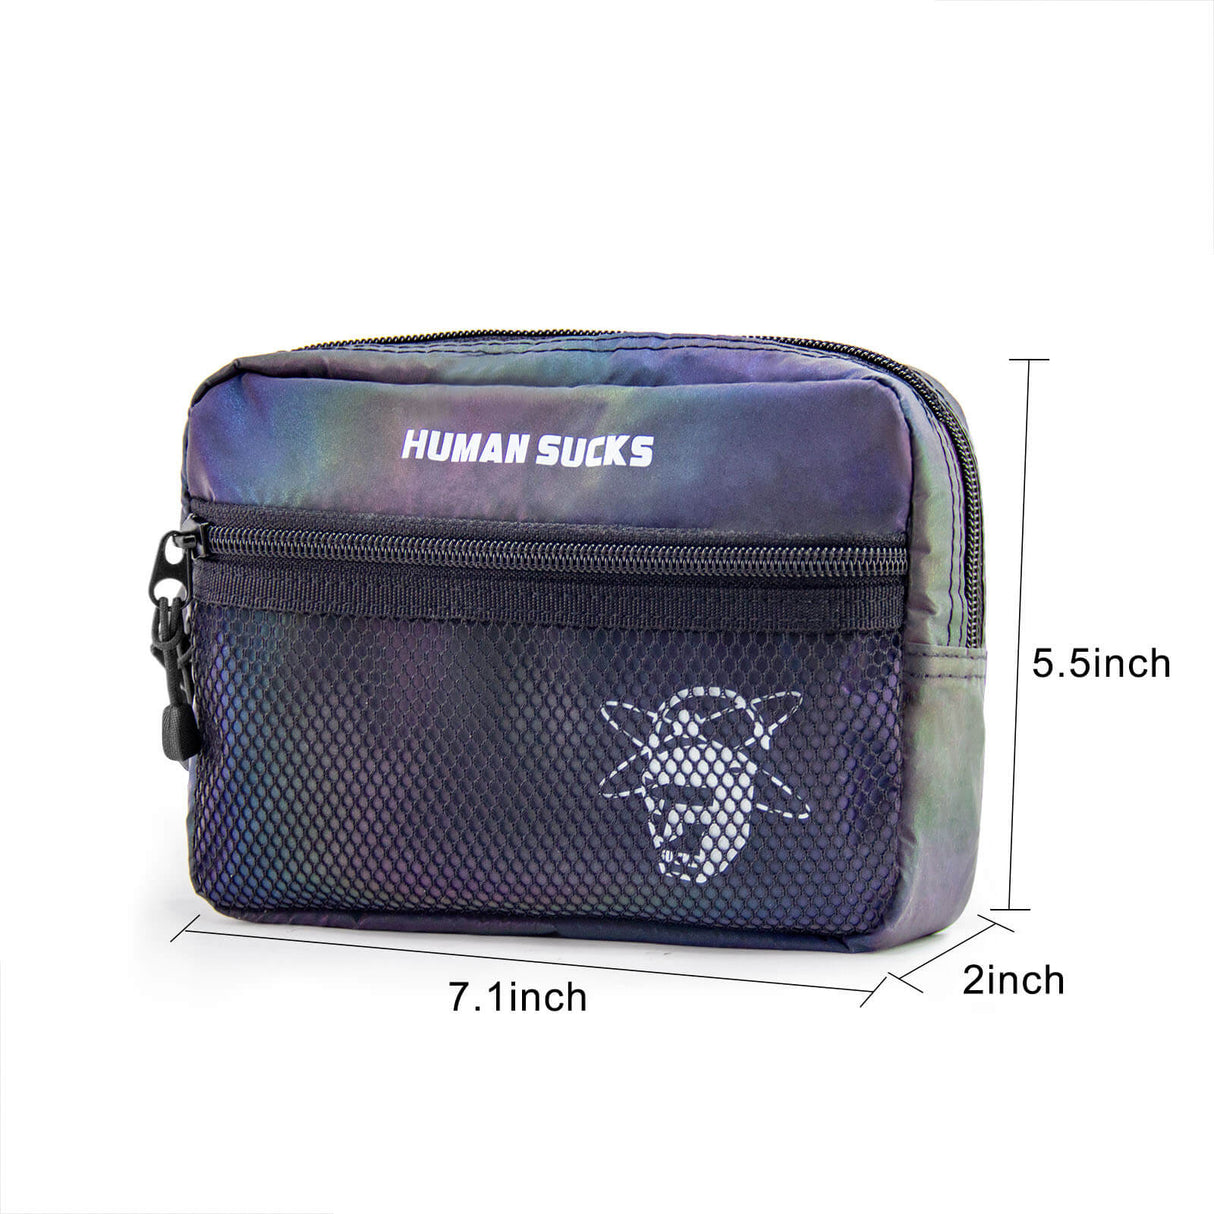 HUMANSUCKS Reflect Fanny Pack front view showcasing the iridescent design and dimensions